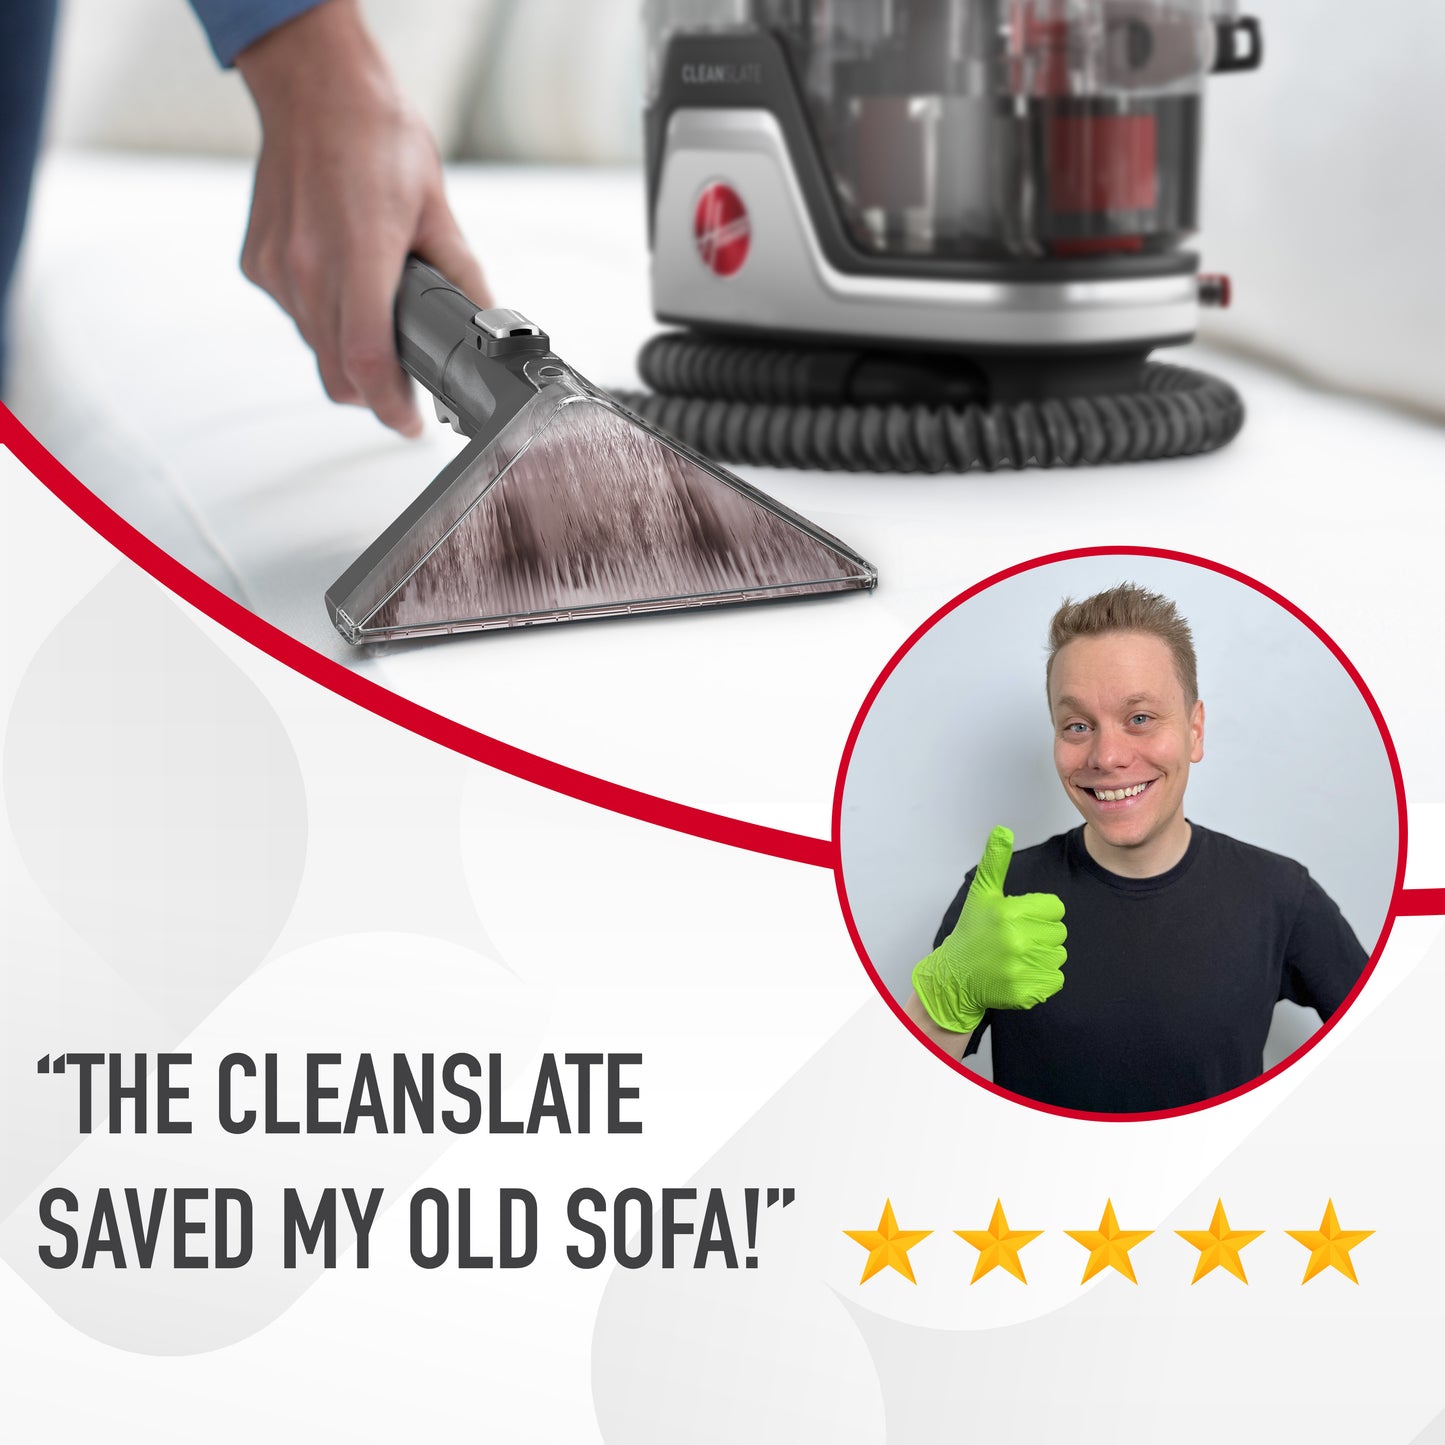 Customer satisfaction 5 star rating stating the cleanslate saved my old sofa!